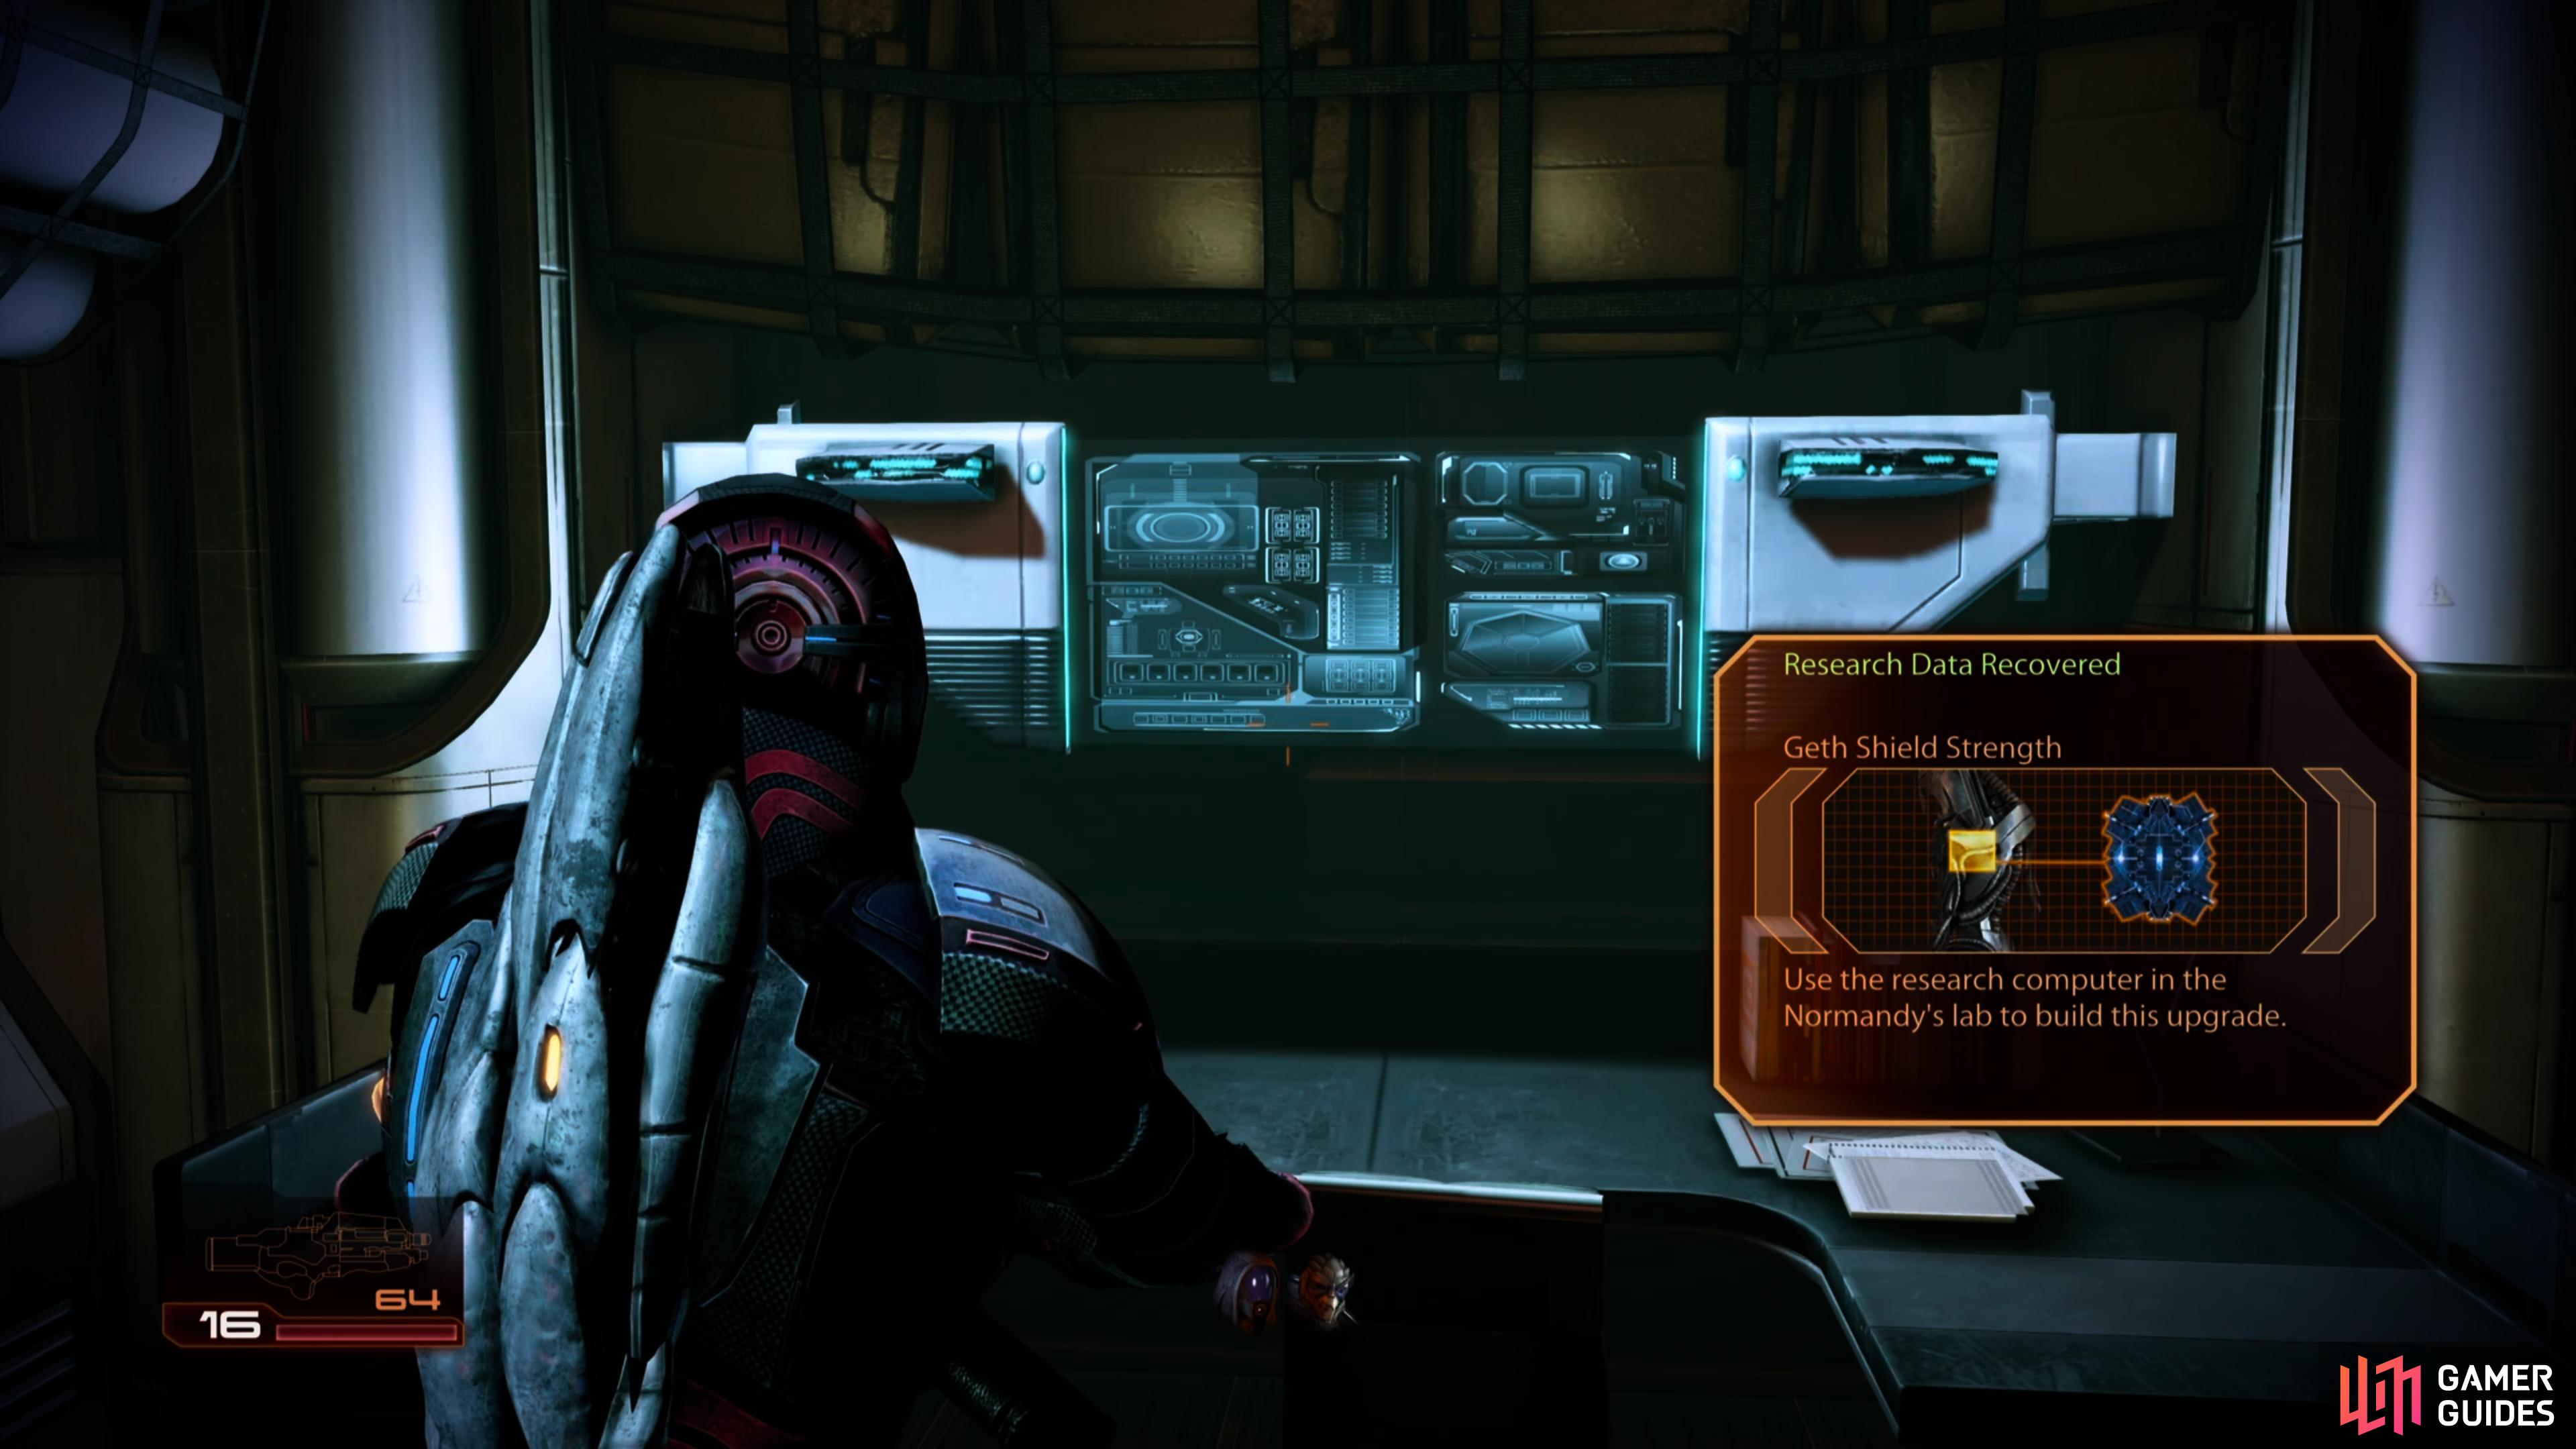 Keep an eye out for a terminal which will yield the Geth Shield Strength research project.